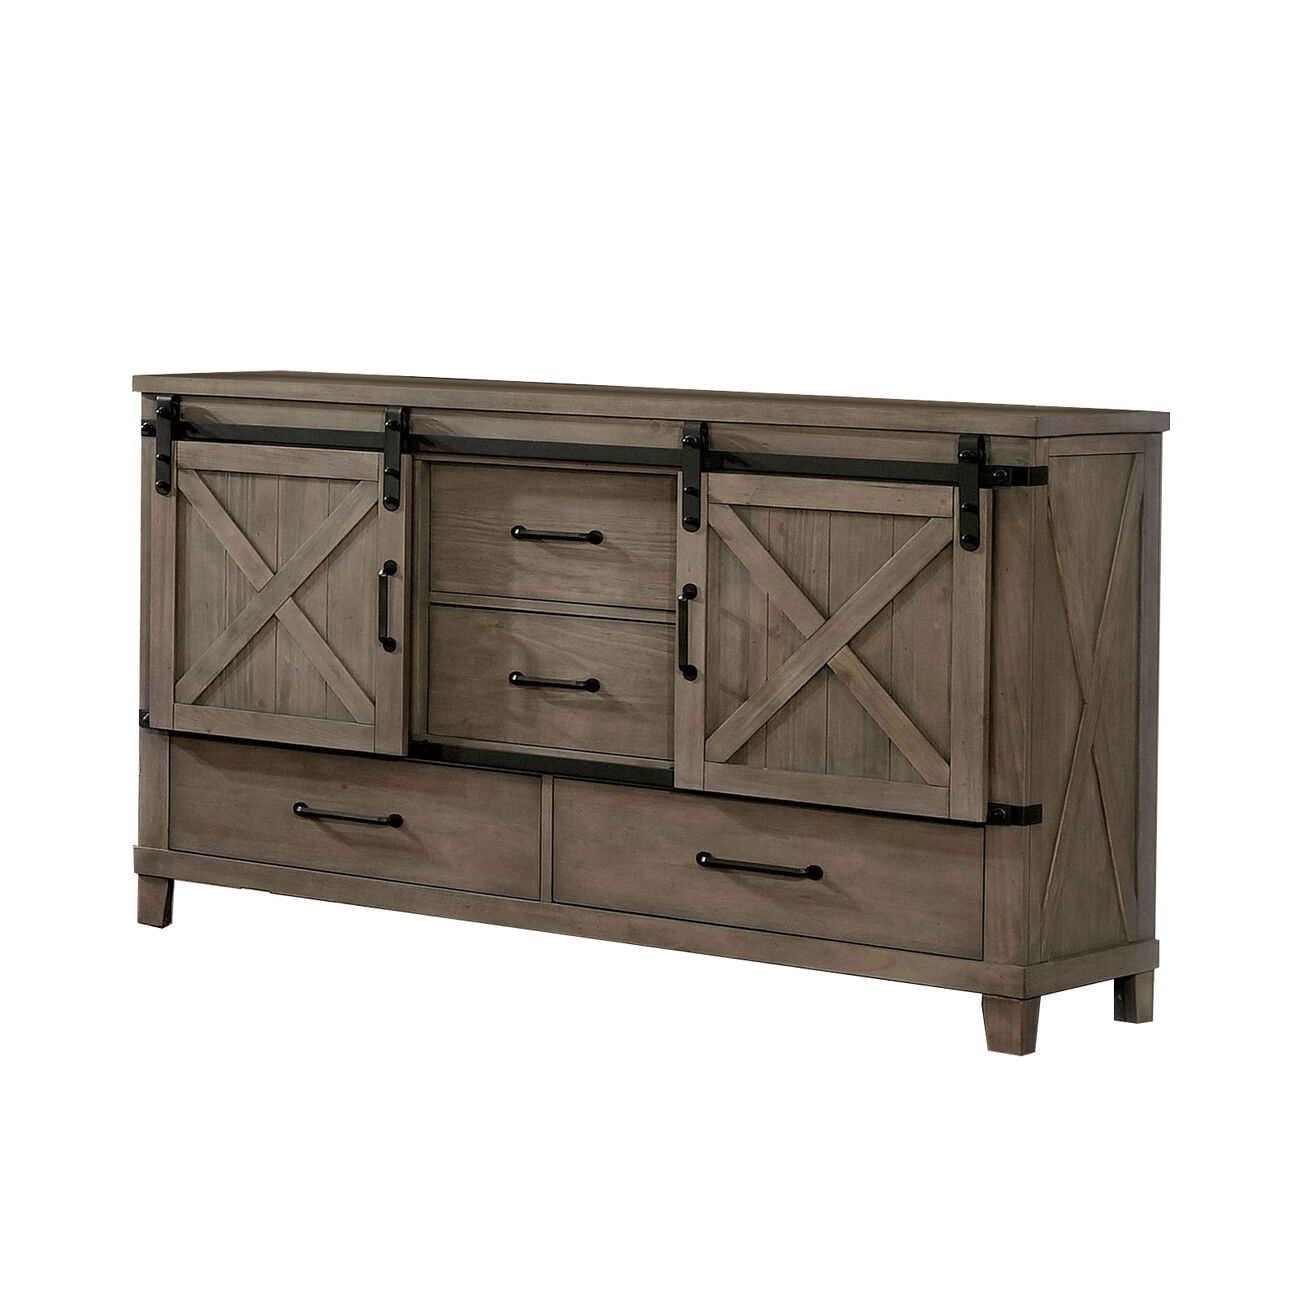 Wood and Metal Dresser with Sliding Cabinets, Taupe Brown and Black